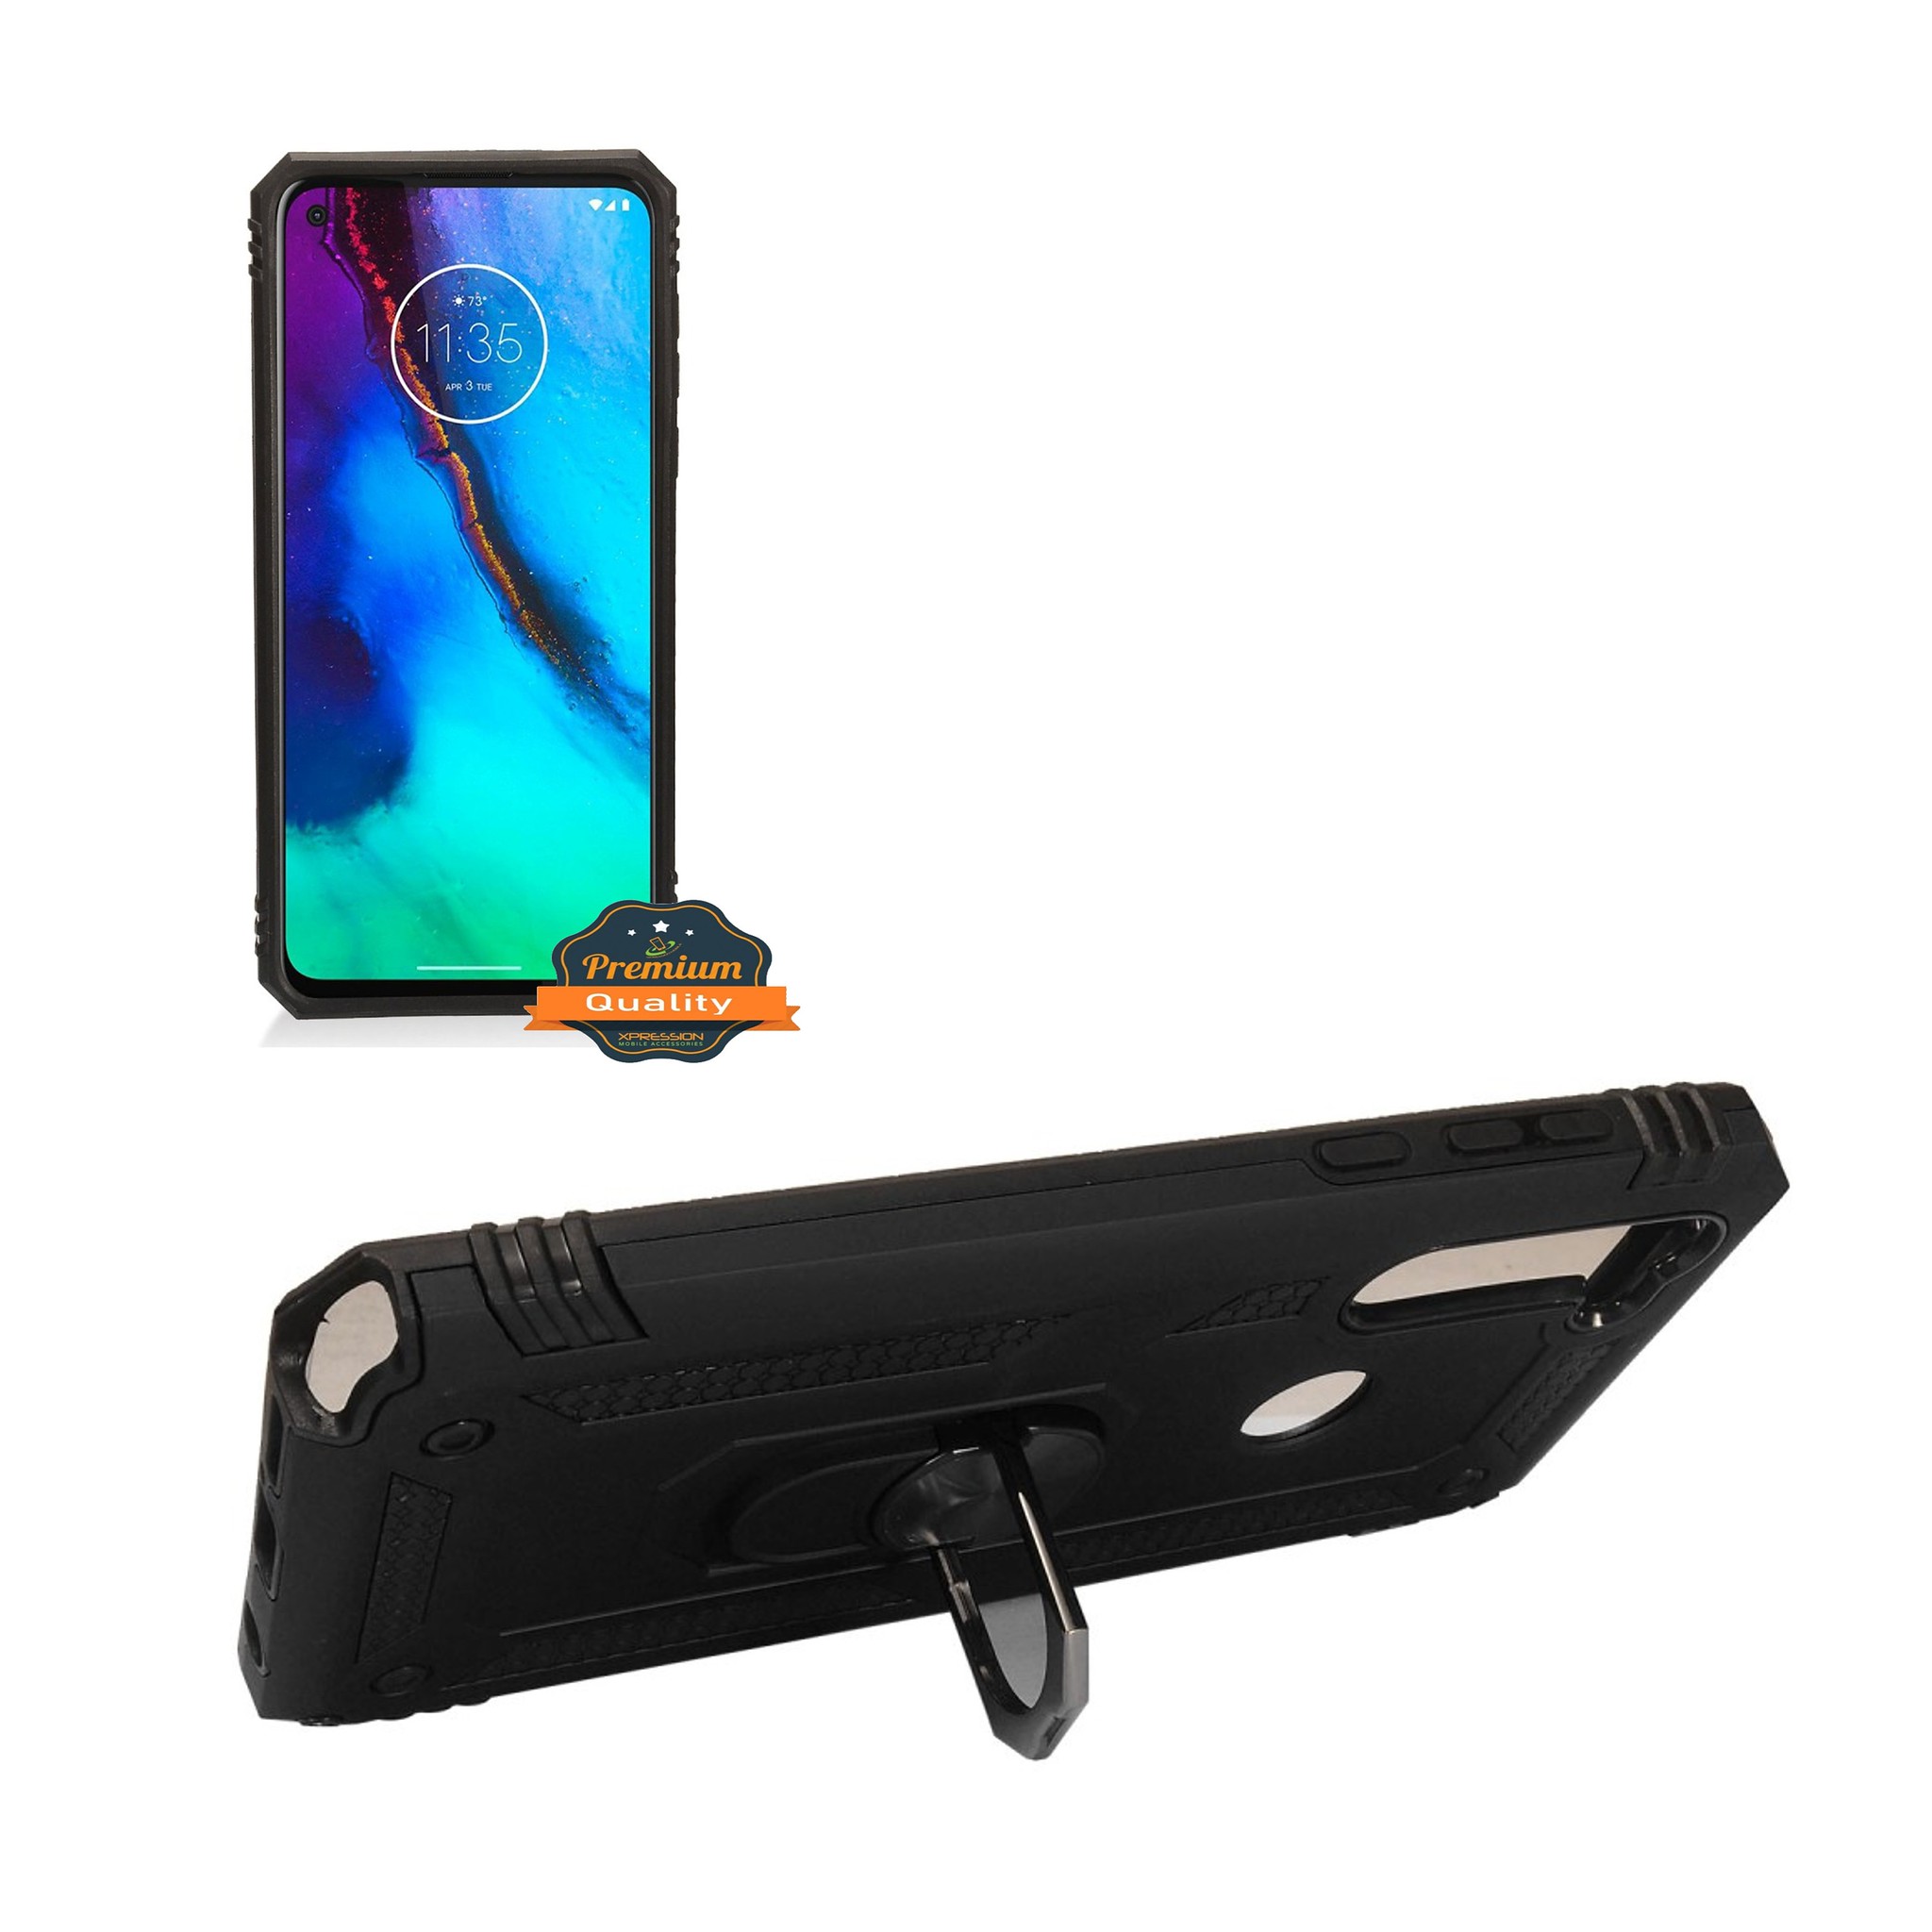 Case for Samsung Galaxy A32 5G with Magnetic Ring Holder Stand Kickstand Slim Hybrid Rugged Dual Layer Heavy Duty Hard Cover for Galaxy A32 5G by Xcell - Black - image 5 of 10